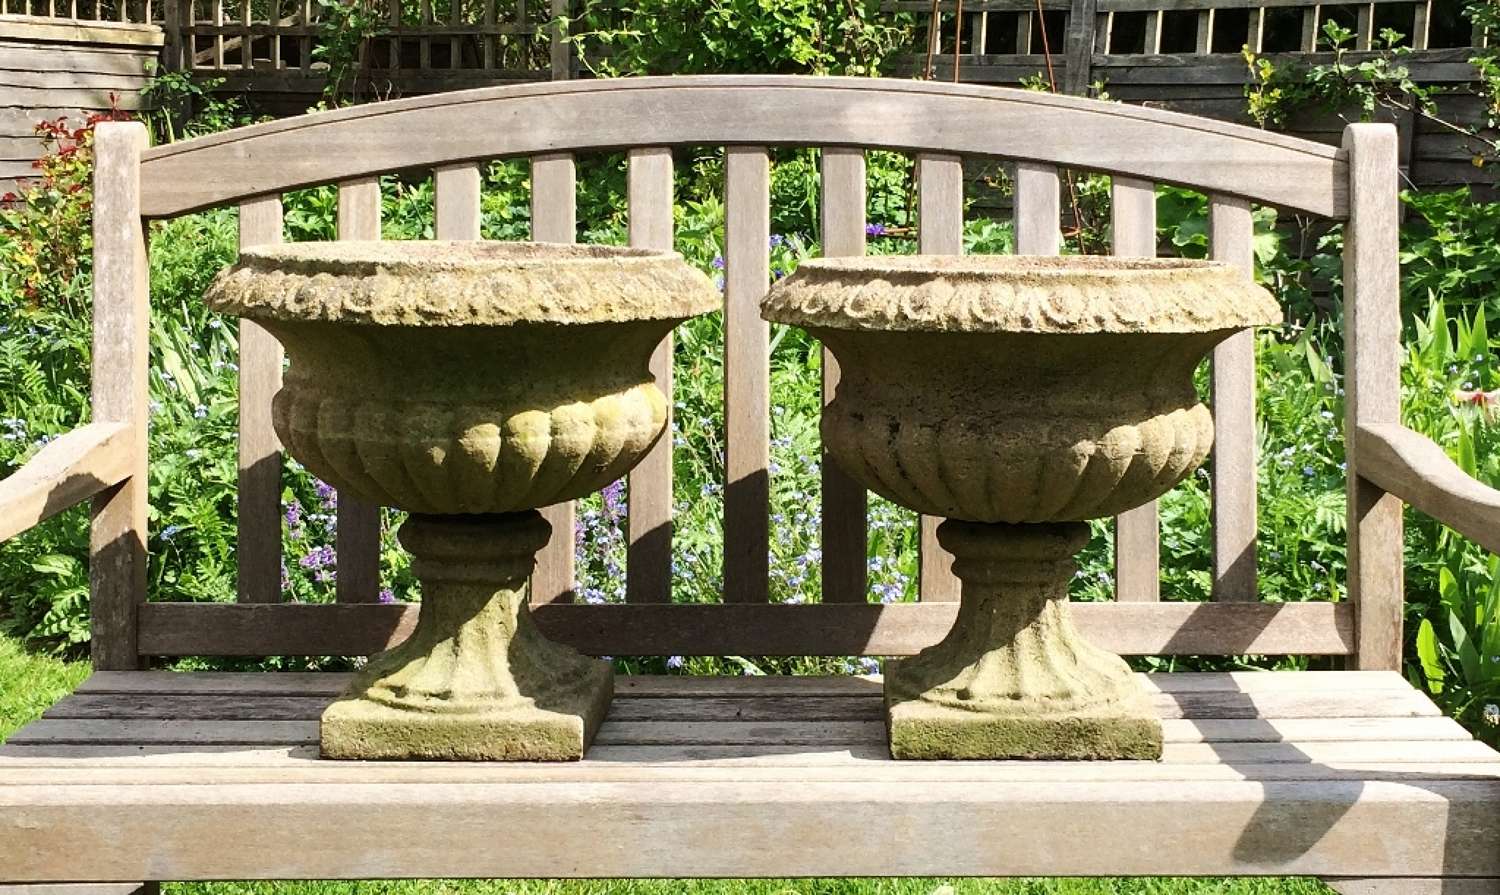 Pair of Weathered Urns